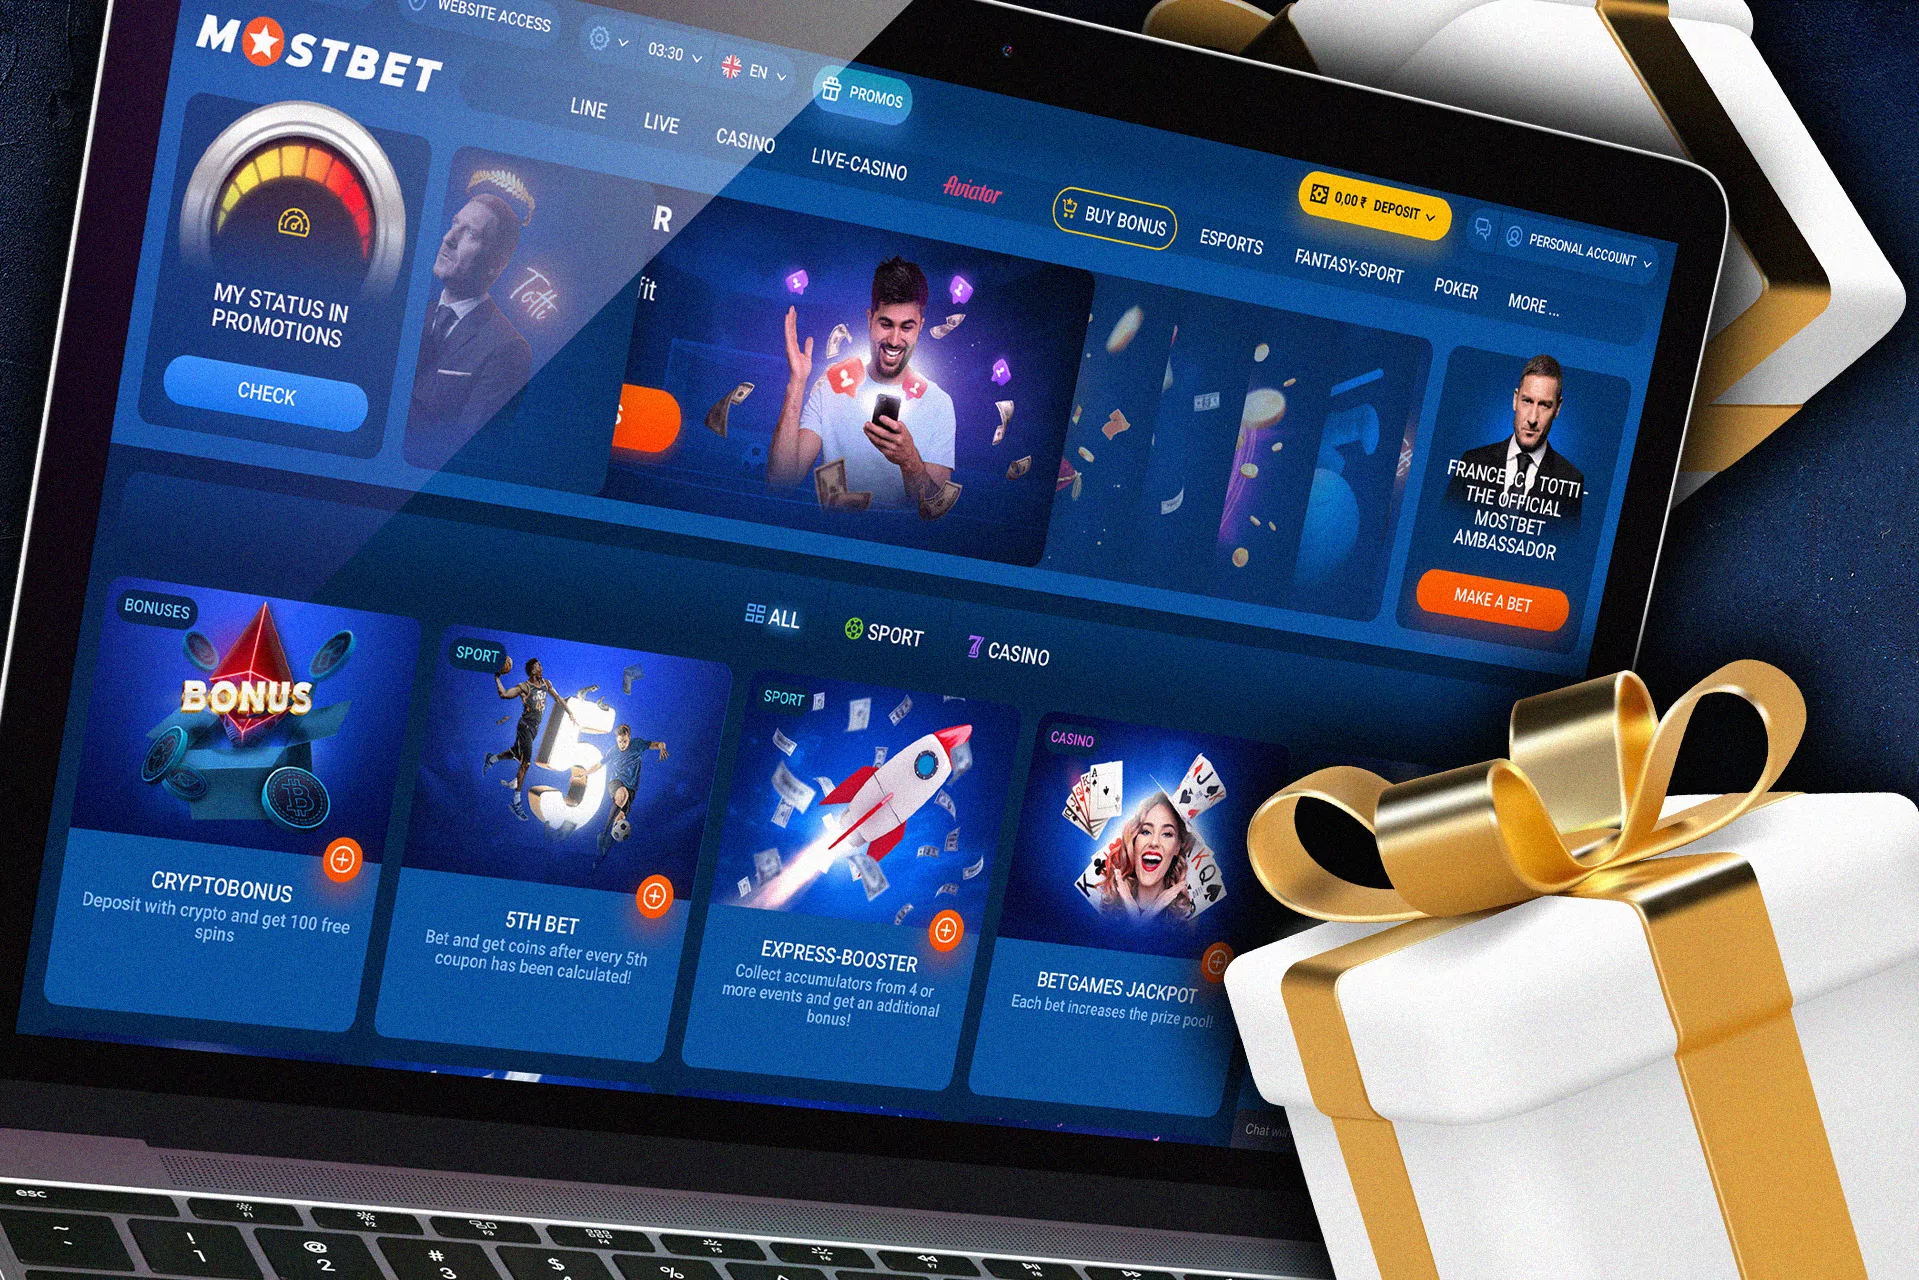 Benefits of Mostbet bookmaker for betting and casino games in India.